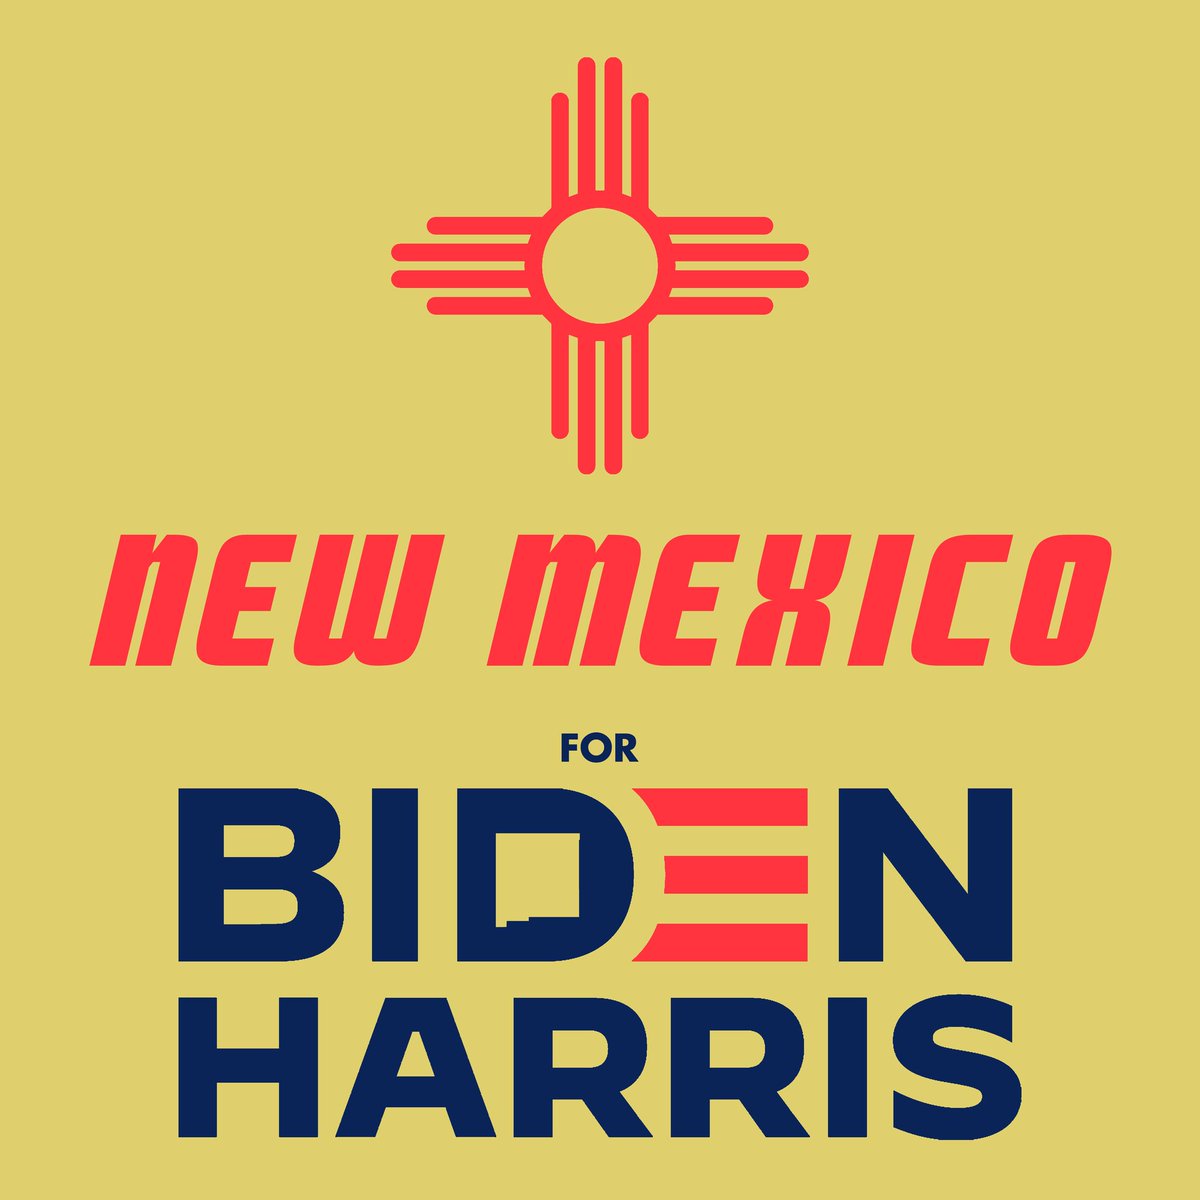 ICYMI my husband  @viva_verde is incredibly talented and made these beautiful state coalition graphics for  #BidenHarris supporters. More otw and he takes requests for priority! RT your state if you're  #RidinWithBidenHarris 5/8  #NewJersey  #NewMexico  #NewYork  #NorthCarolina